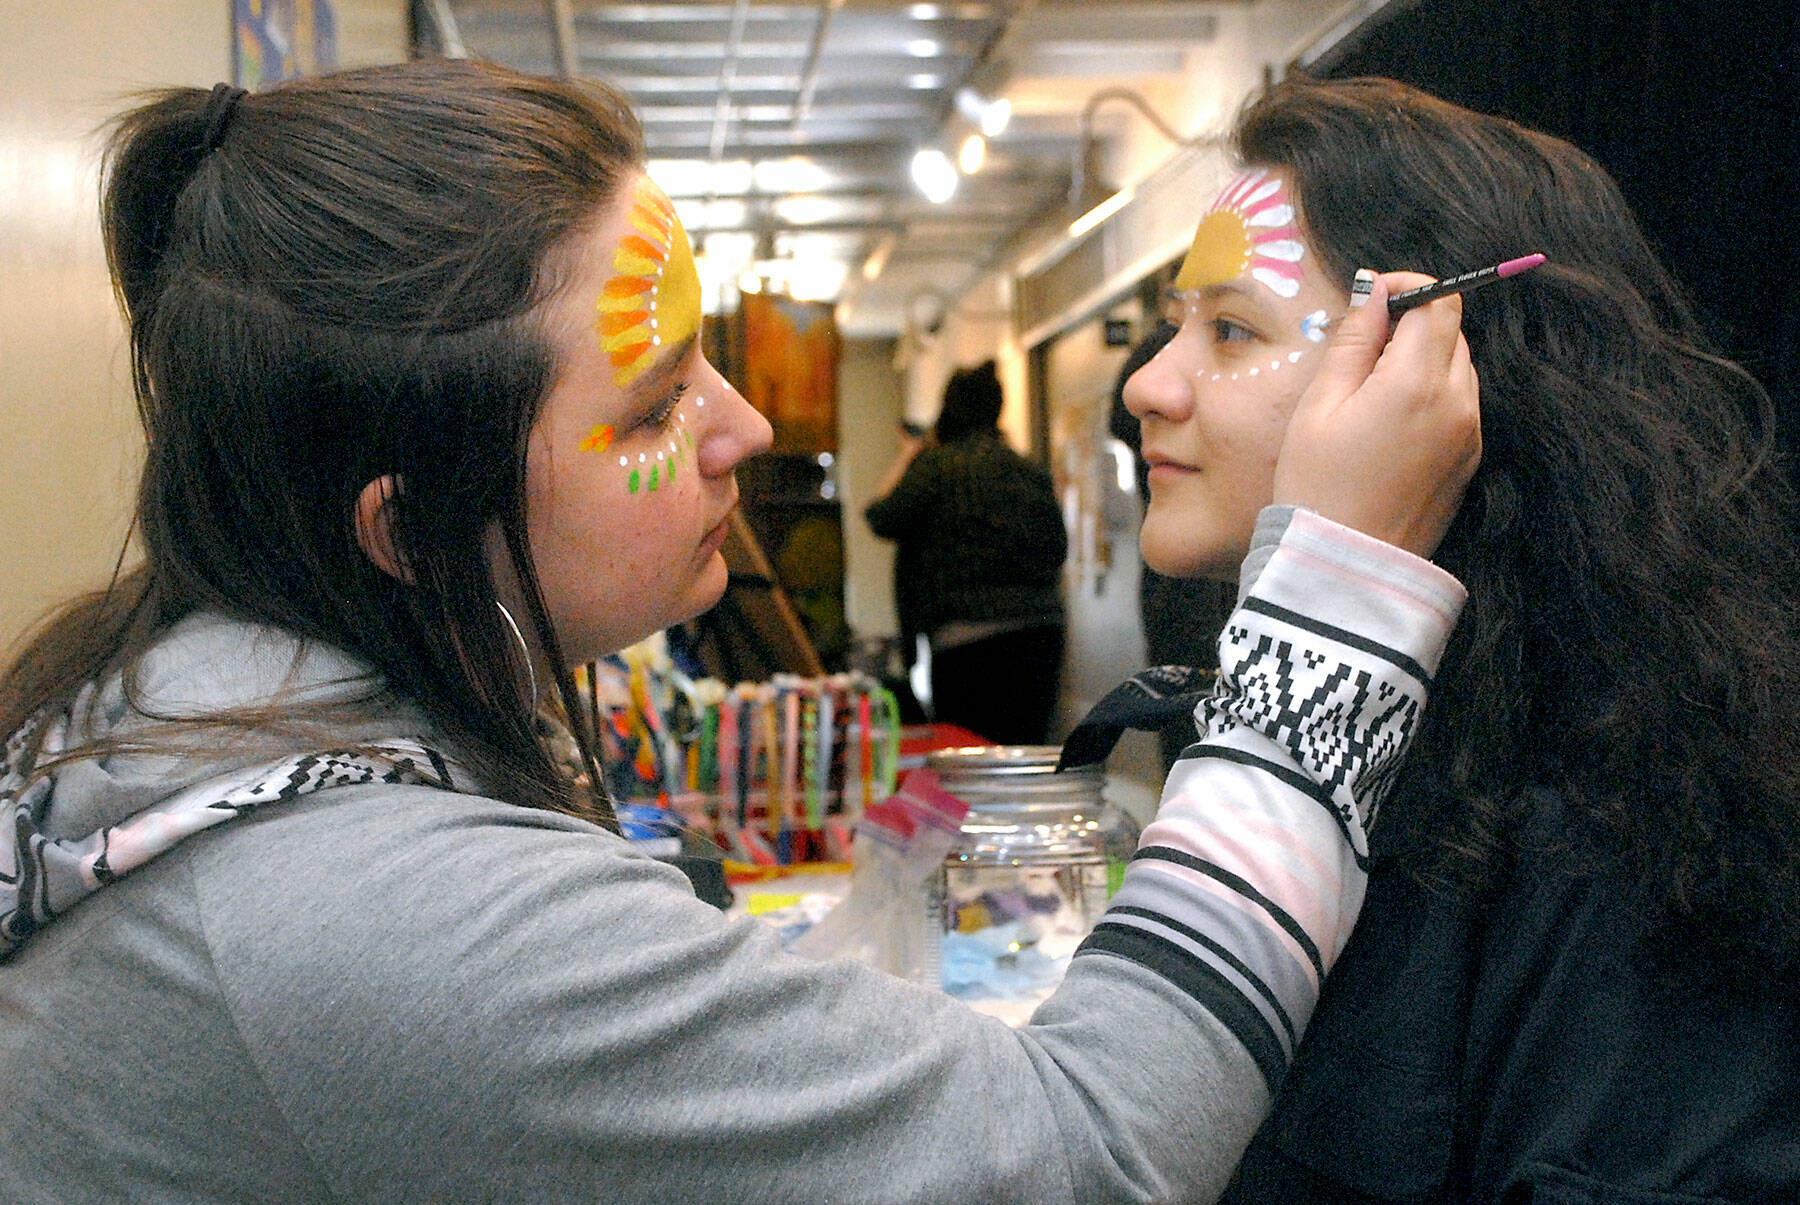 Soohia Art of Port Angeles, right, gets her face painted by Emma Gockerell of Sequim-based Emma-gine Painting & Parties during Friday’s pop-up market at the inaugural Squatchcon 2022 Comic & Arts Convention at The Wharf on the Port Angeles waterfront. (Keith Thorpe/Peninsula Daily News)